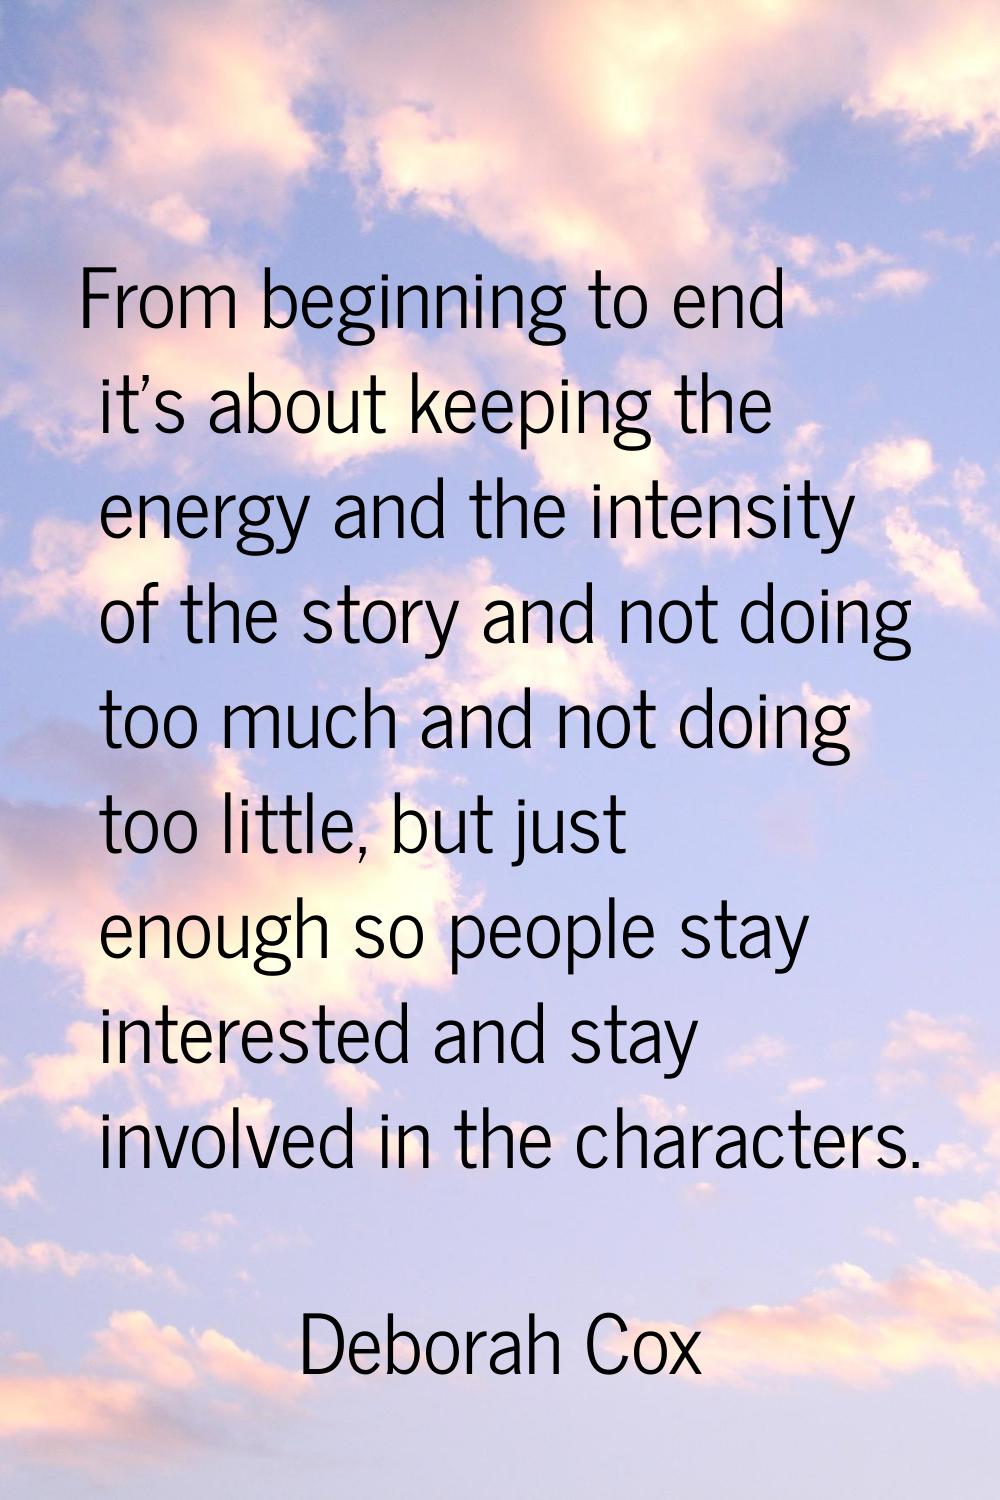 From beginning to end it's about keeping the energy and the intensity of the story and not doing to